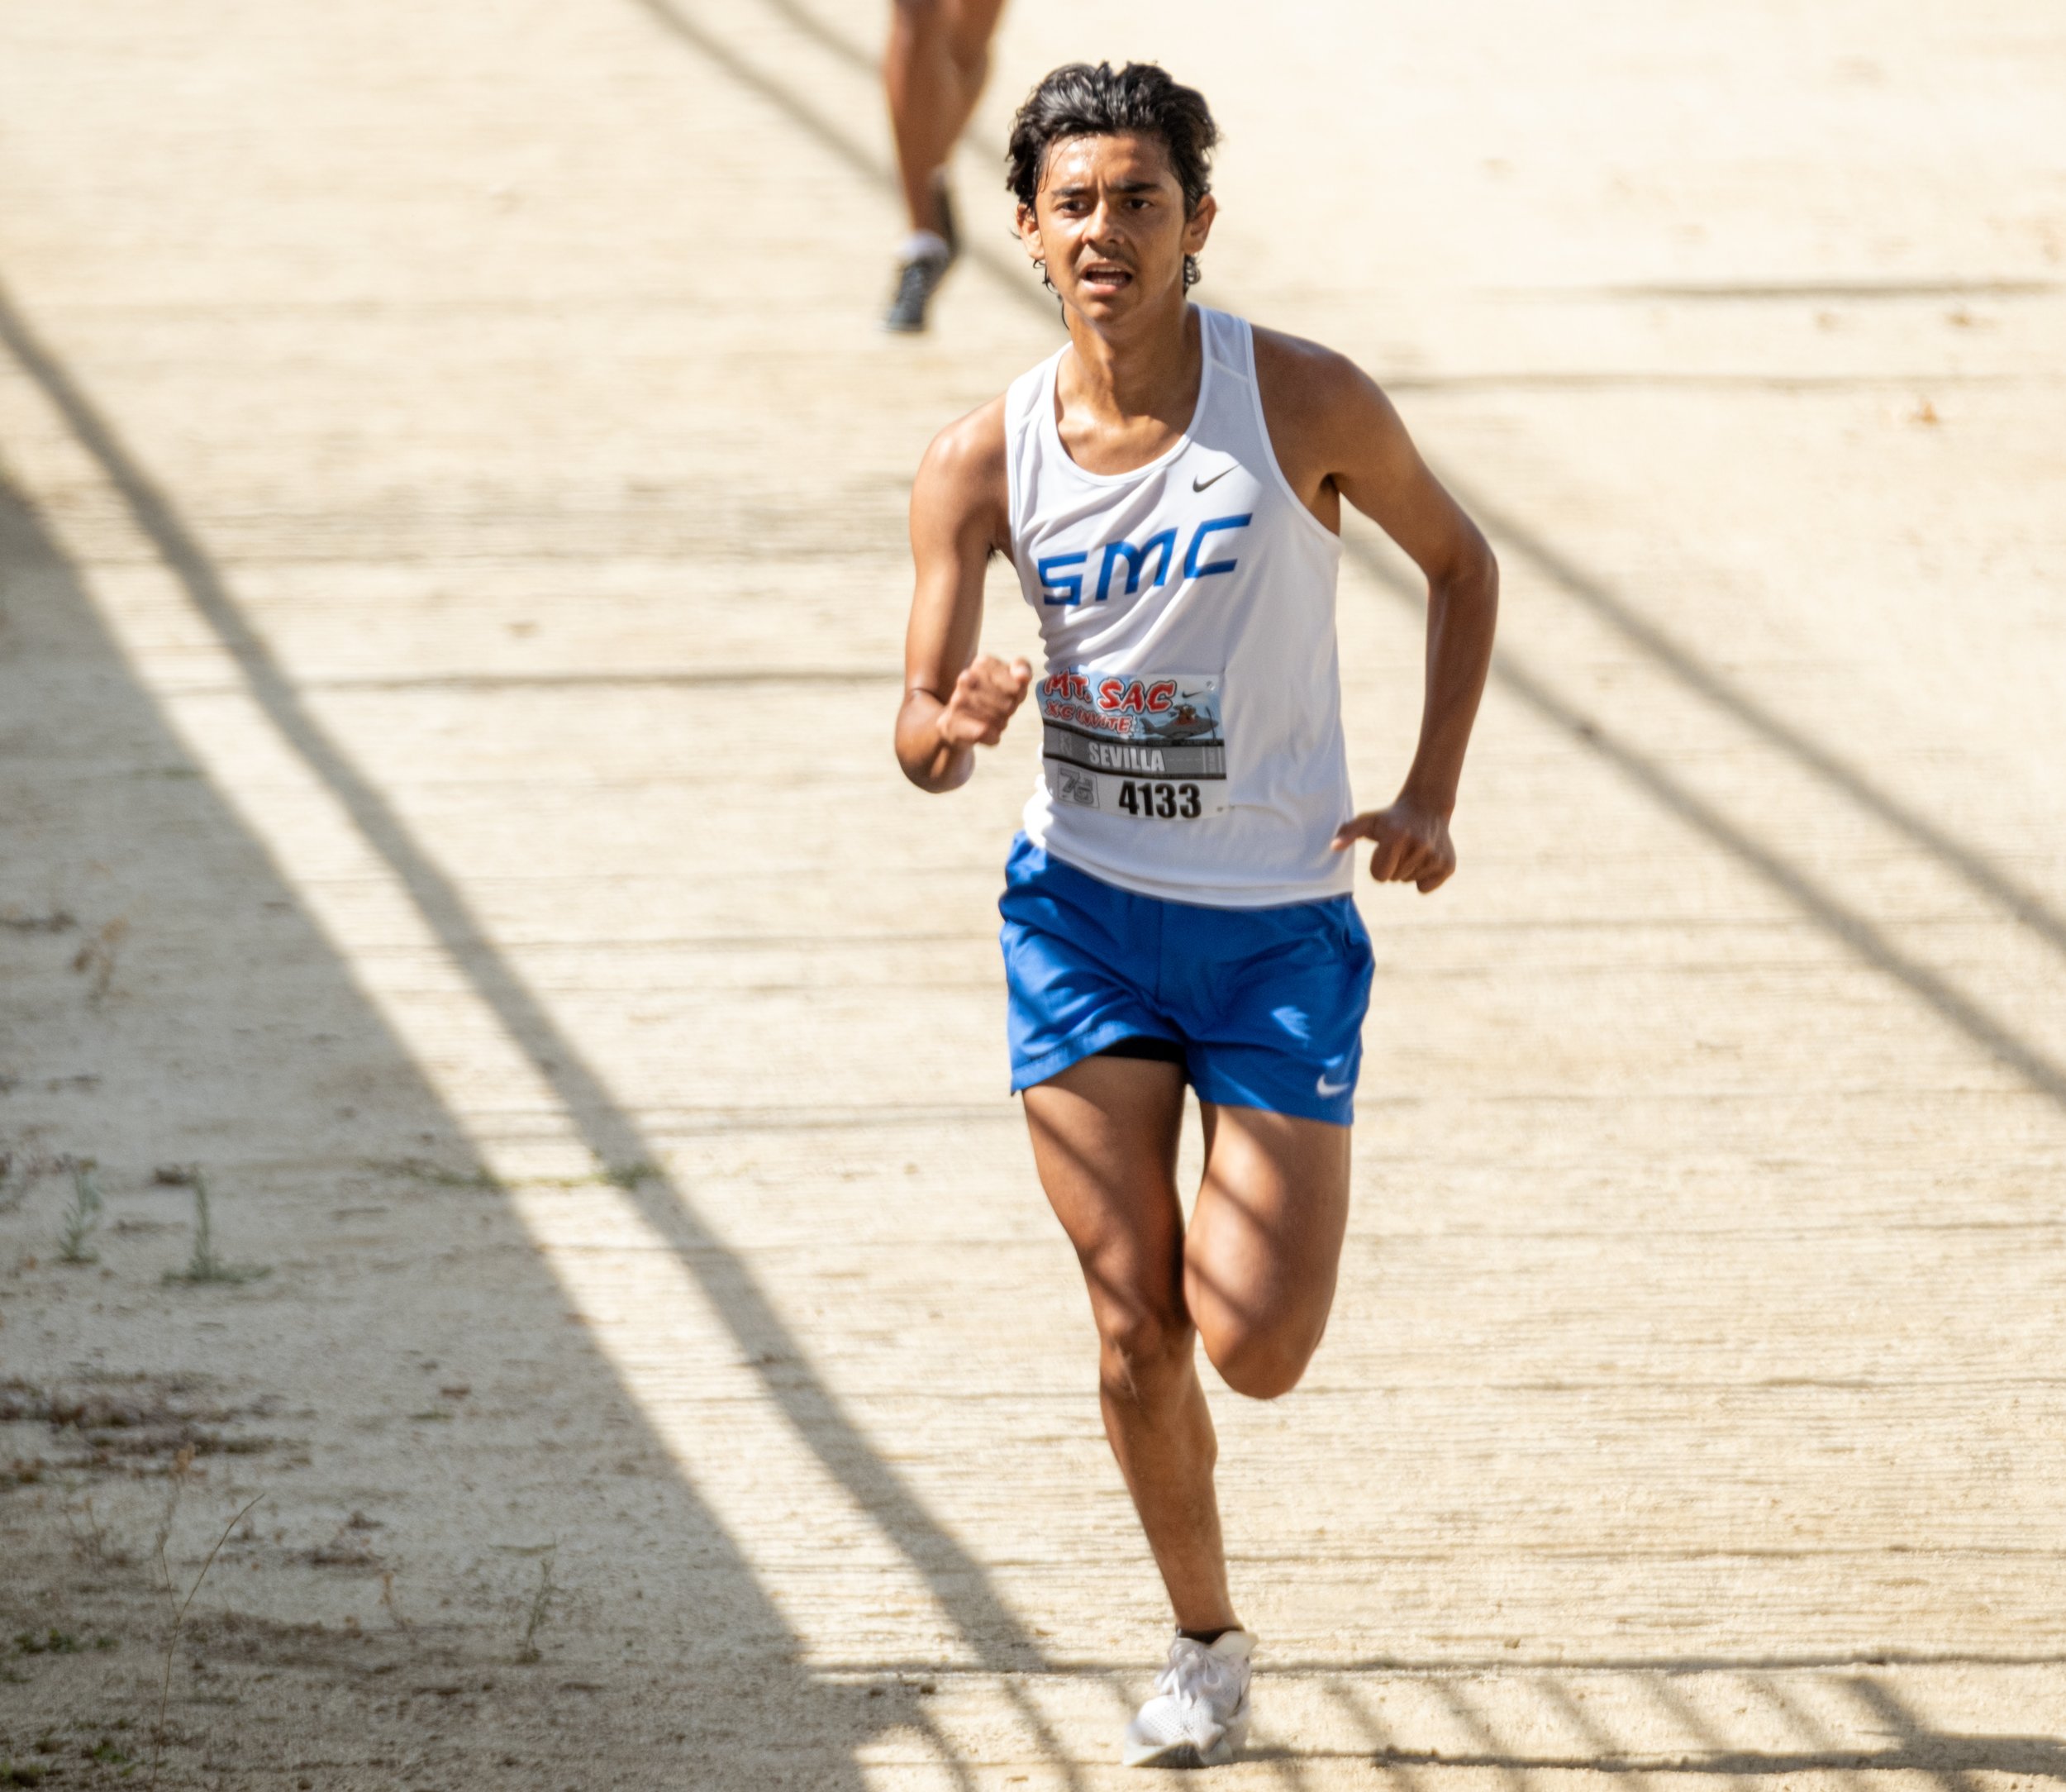  Jose Sevilla running towards the finish line at the MT. SAC Cross Country Invitational on Friday, Oct 13 at MT. SAC in Walnut, Calif. (Danilo Perez | The Corsair) 